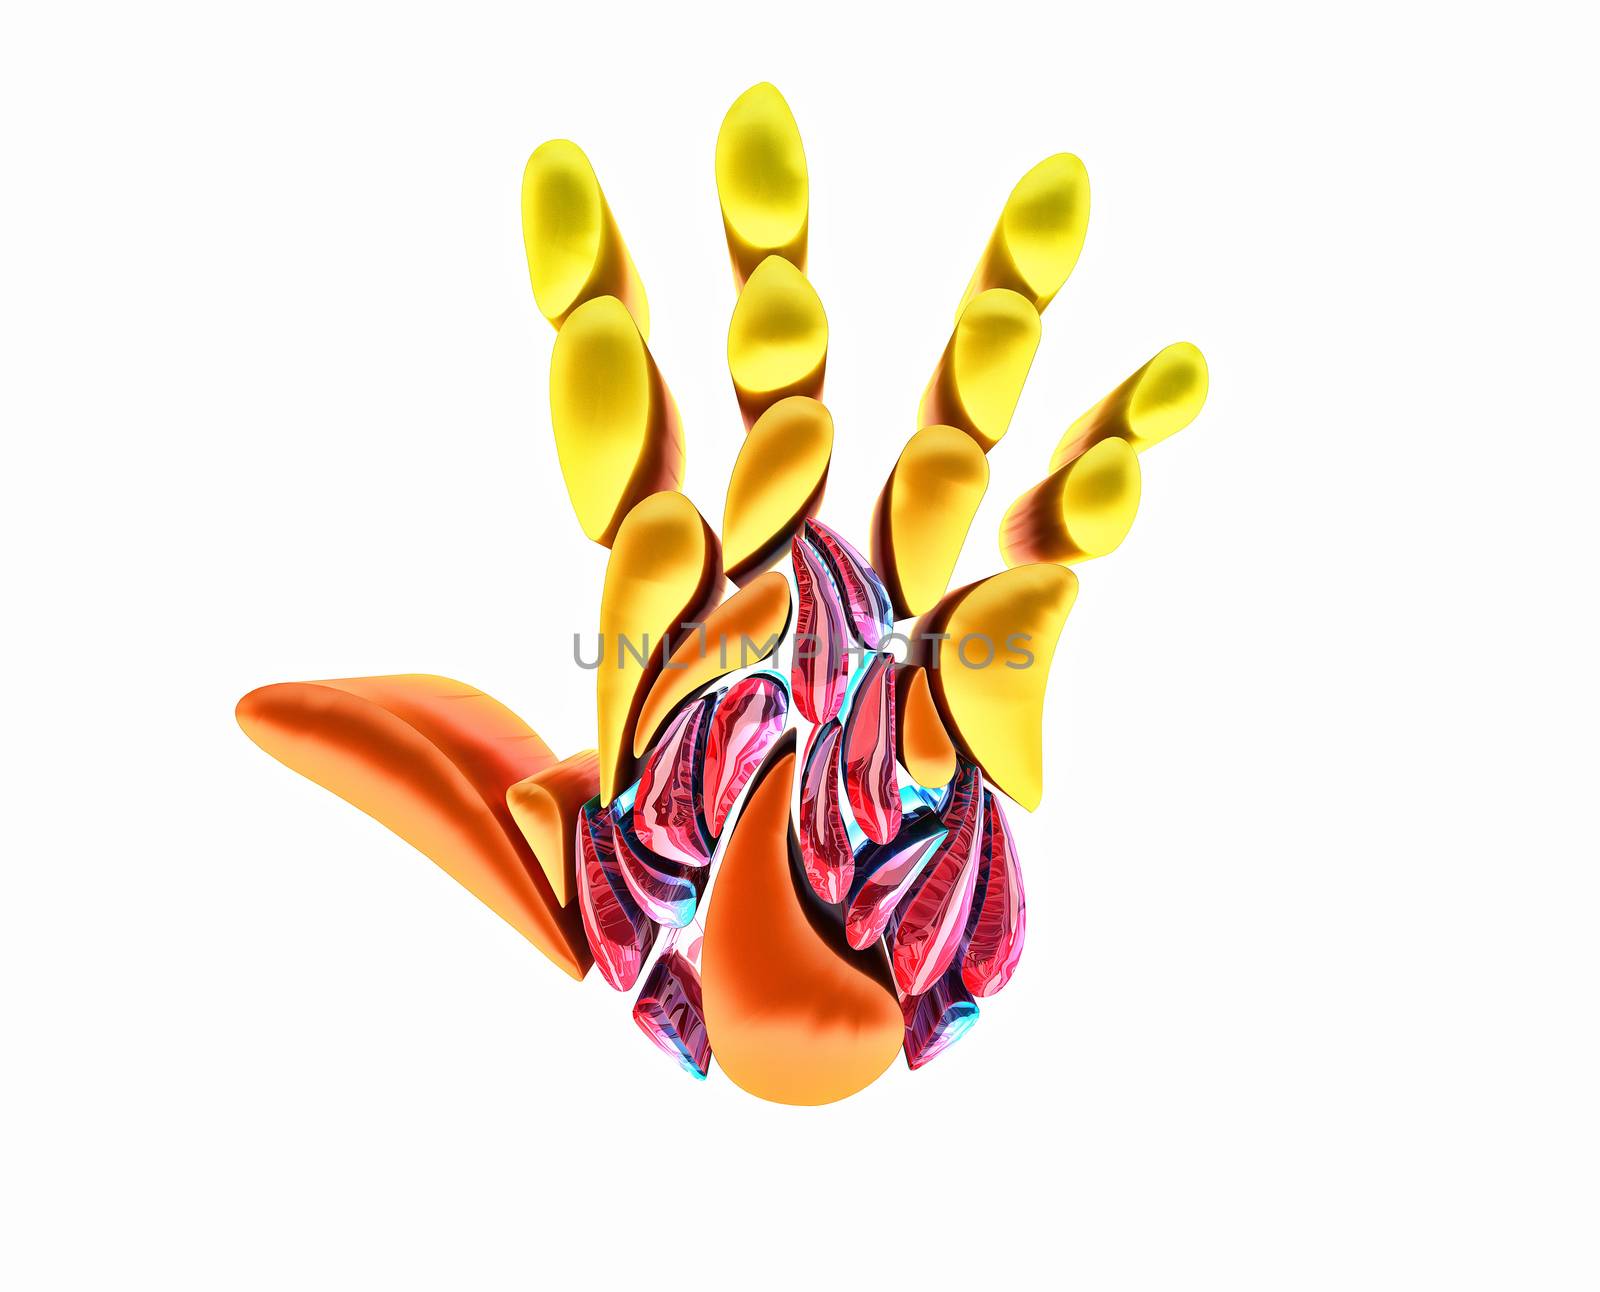 Fire palm logo combined. Volumetric sign open hand. In center of hand translucent elements form campfire shape. flame 3d logotype composed of small orange and yellow gradient parts.